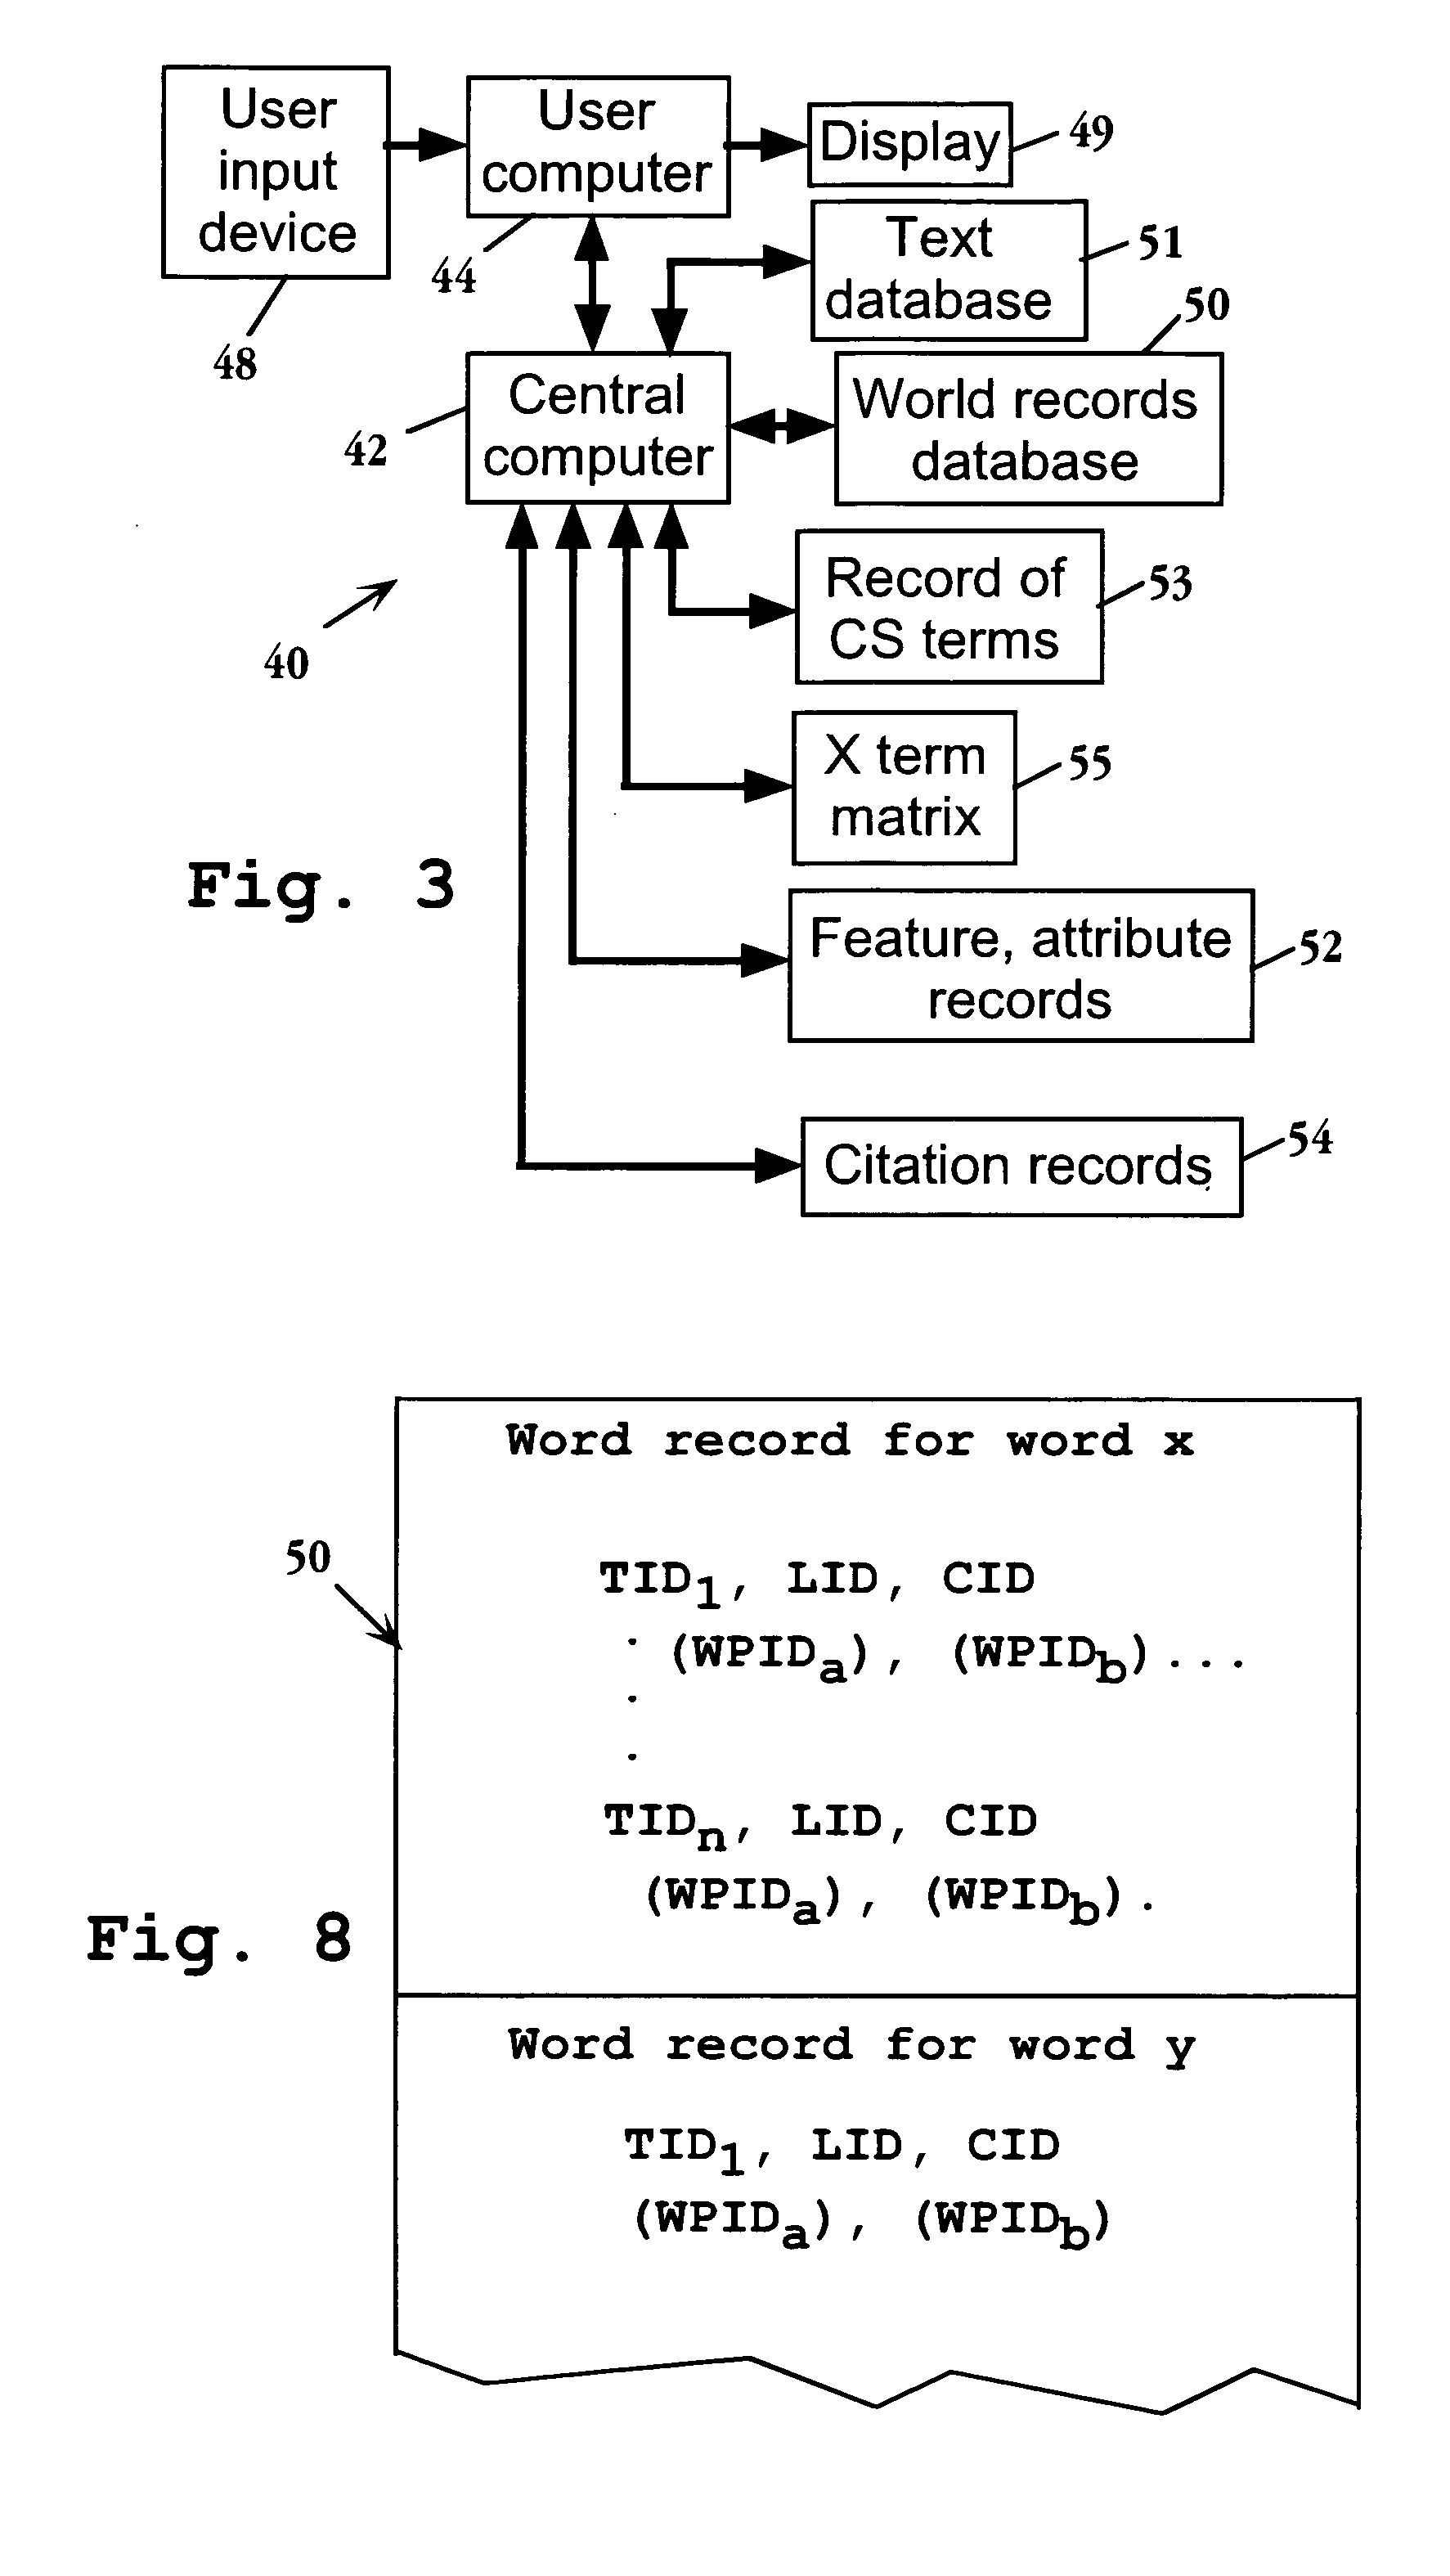 Code, system, and method for generating concepts